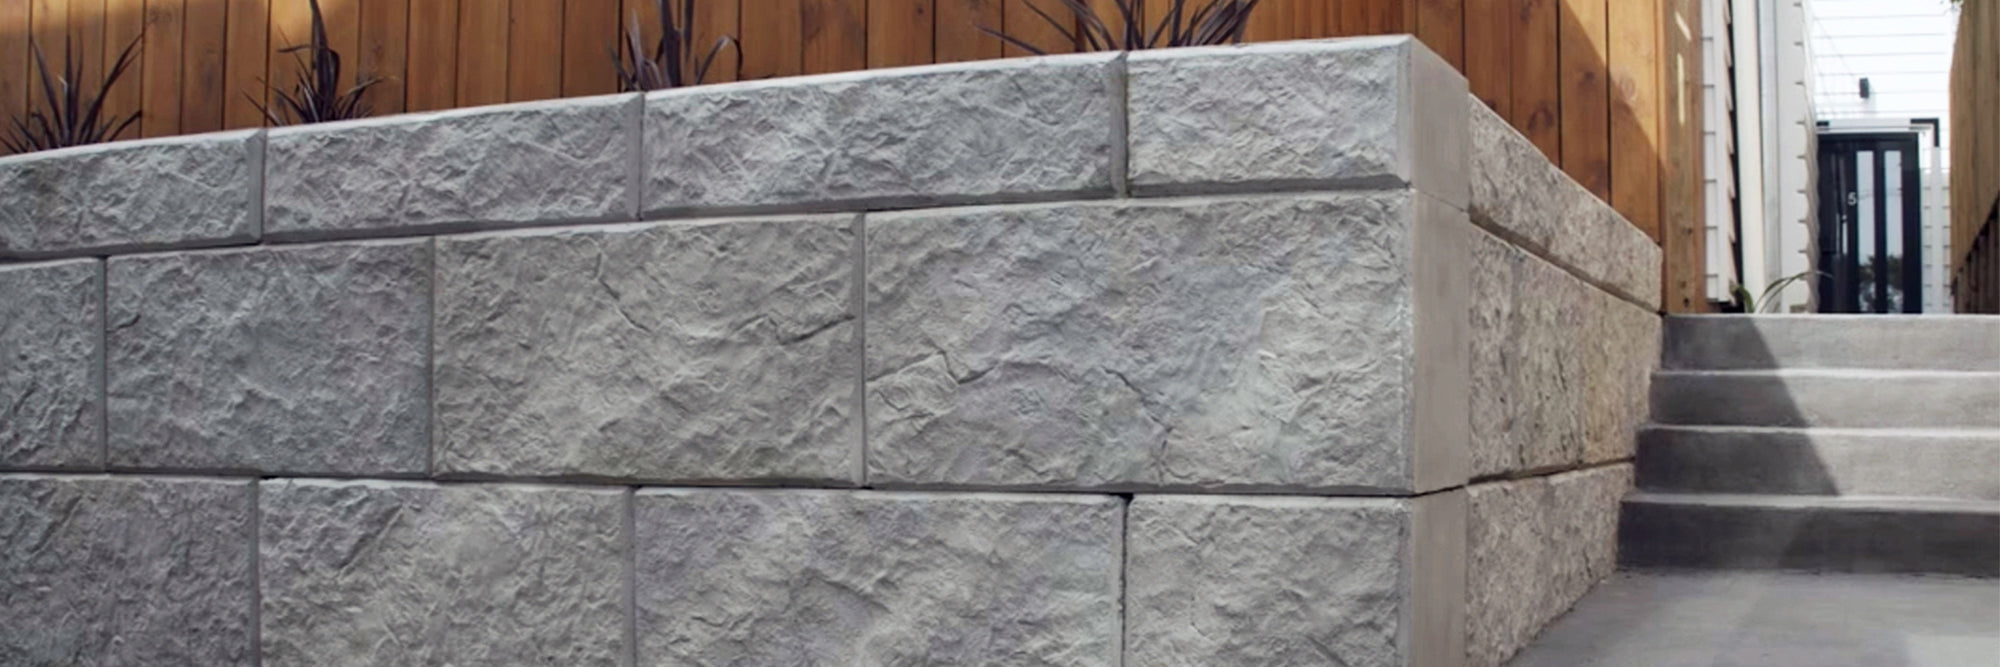 Stonebloc concrete blocks forming a retaining wall in an infill housing development